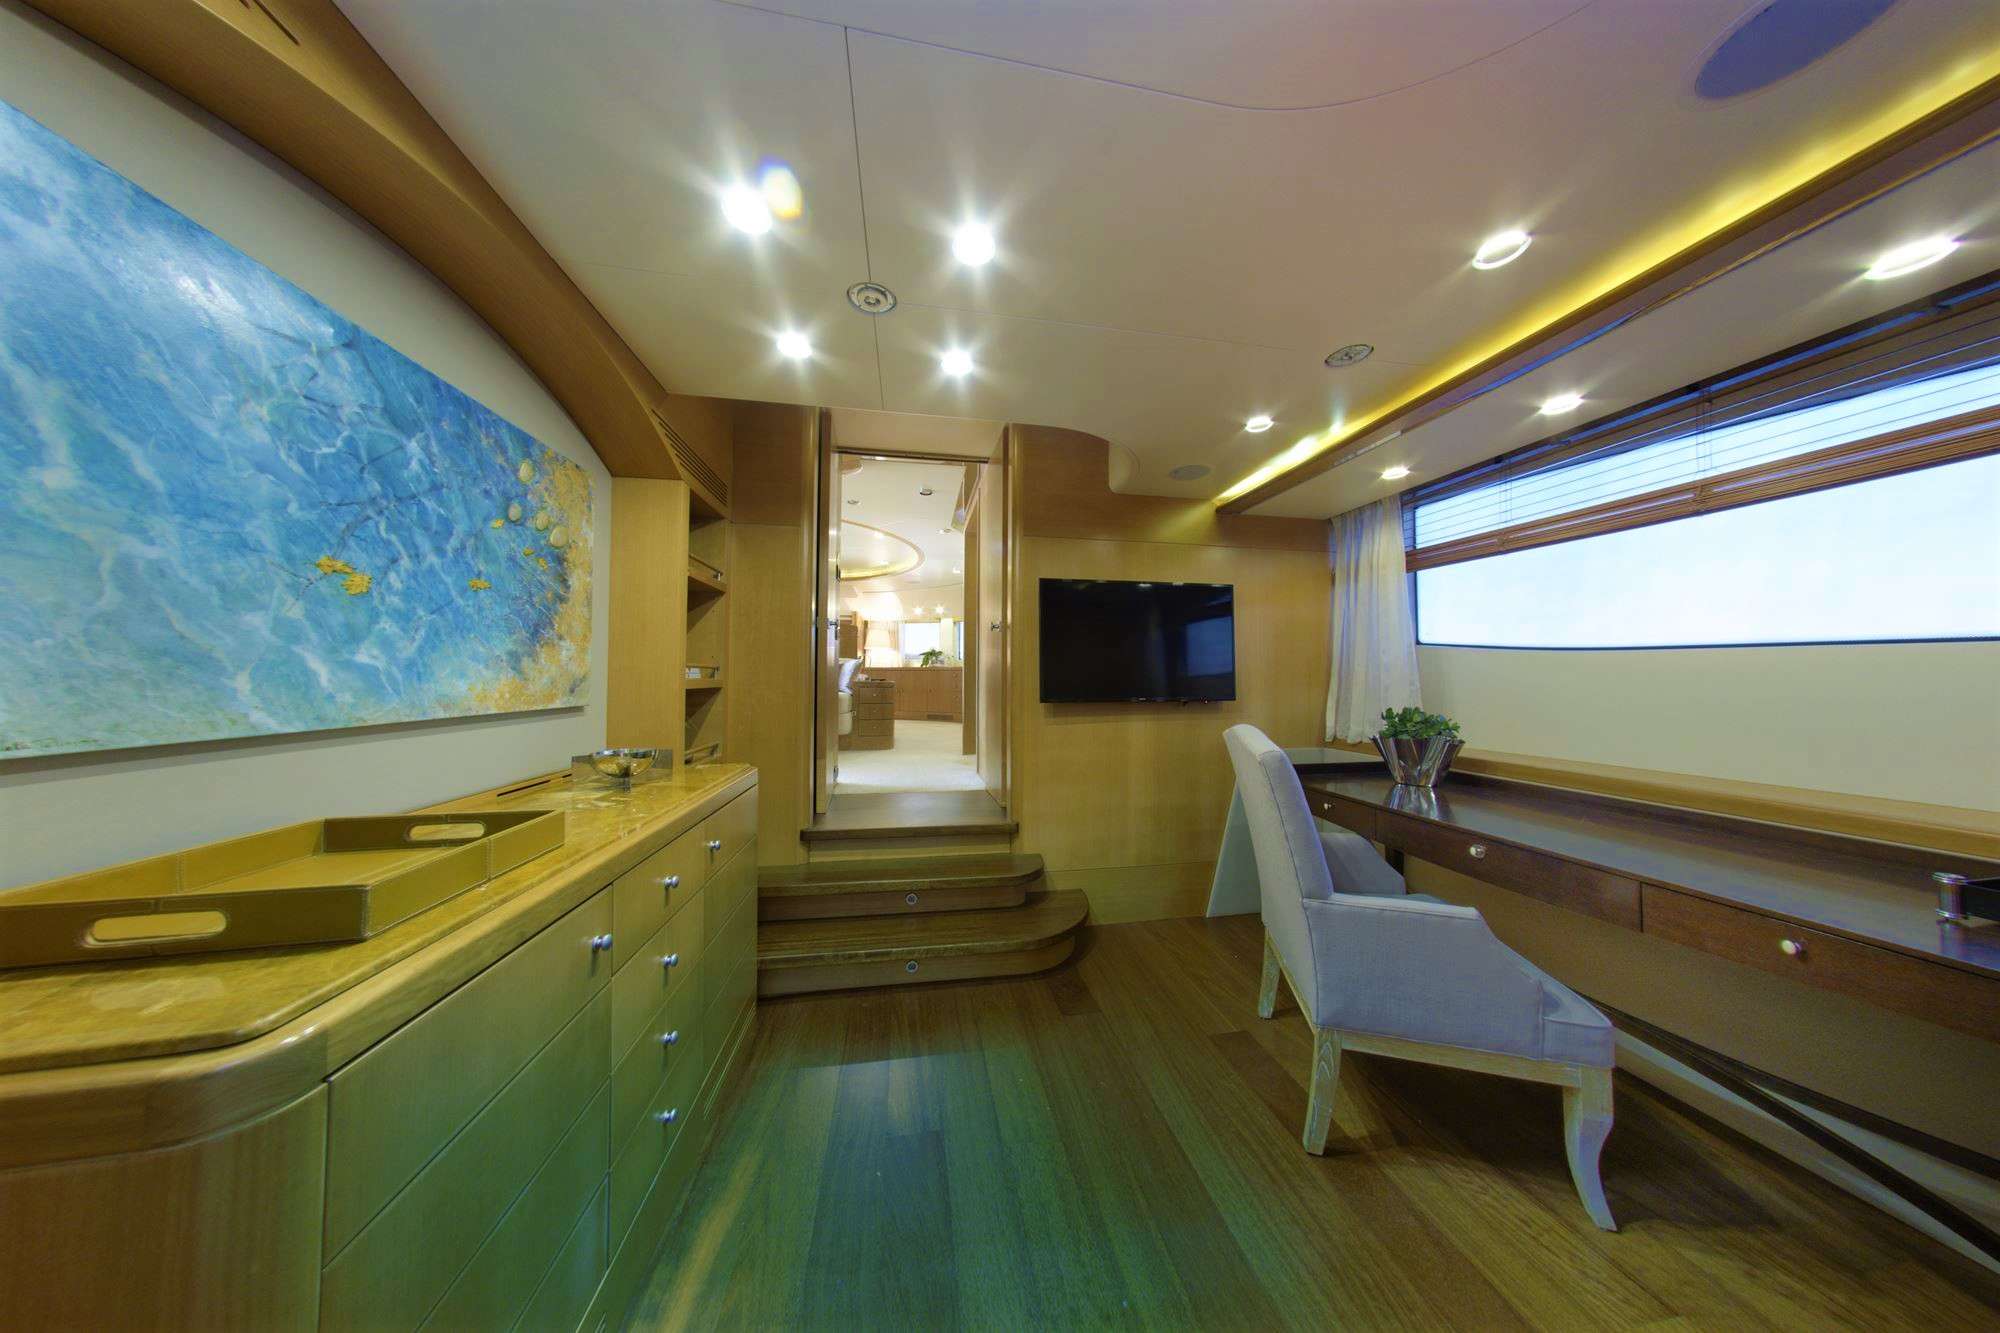 GRANDE AMORE Yacht Charter - Main Deck Office - Can be either connected or separated by Master Cabin